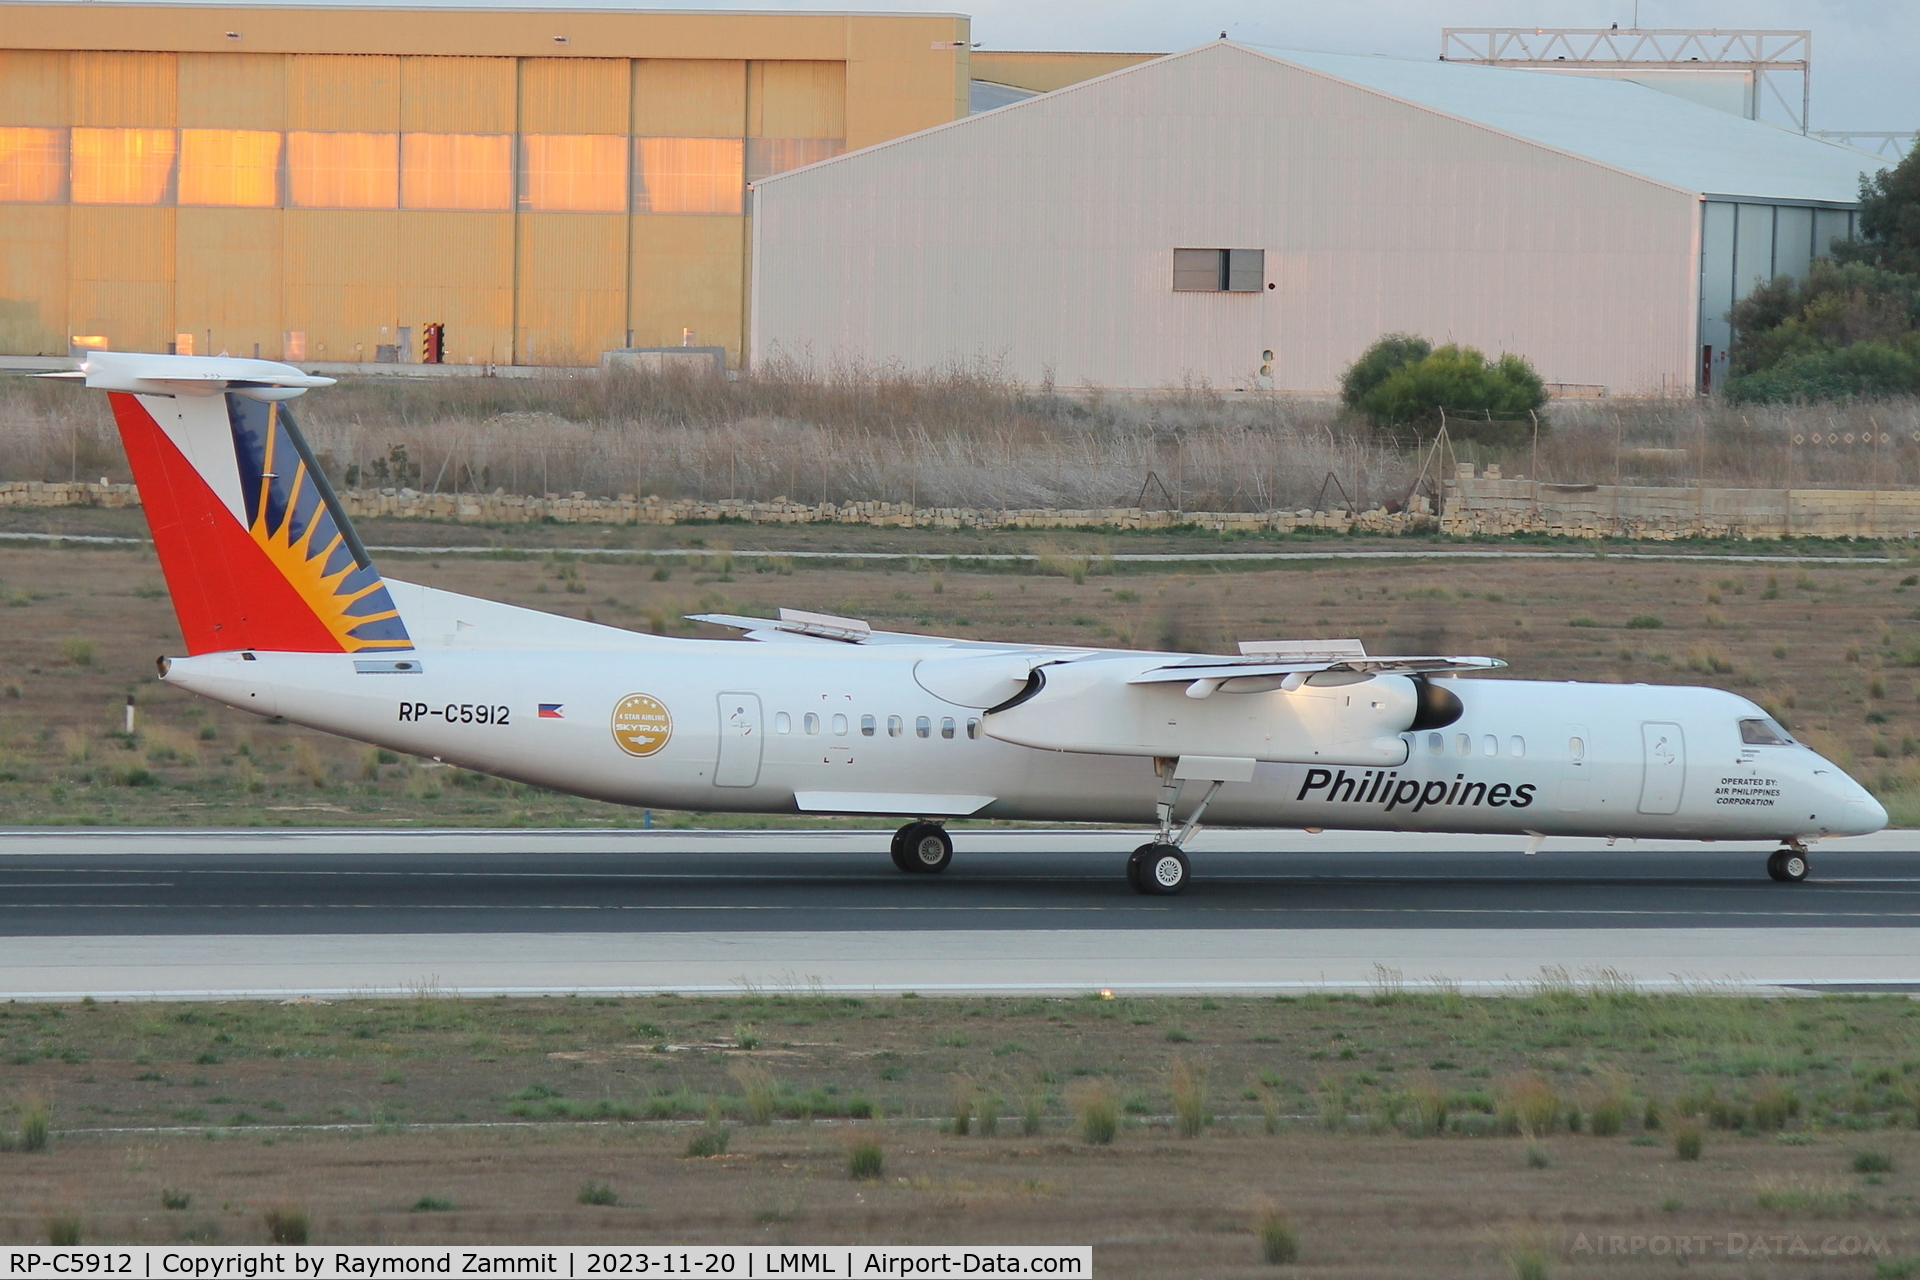 RP-C5912, 2018 Bombardier DHC-8-402 Dash 8 C/N 4588, Bombardier DHC-8-402 RP-C5912 Philippines Airlines